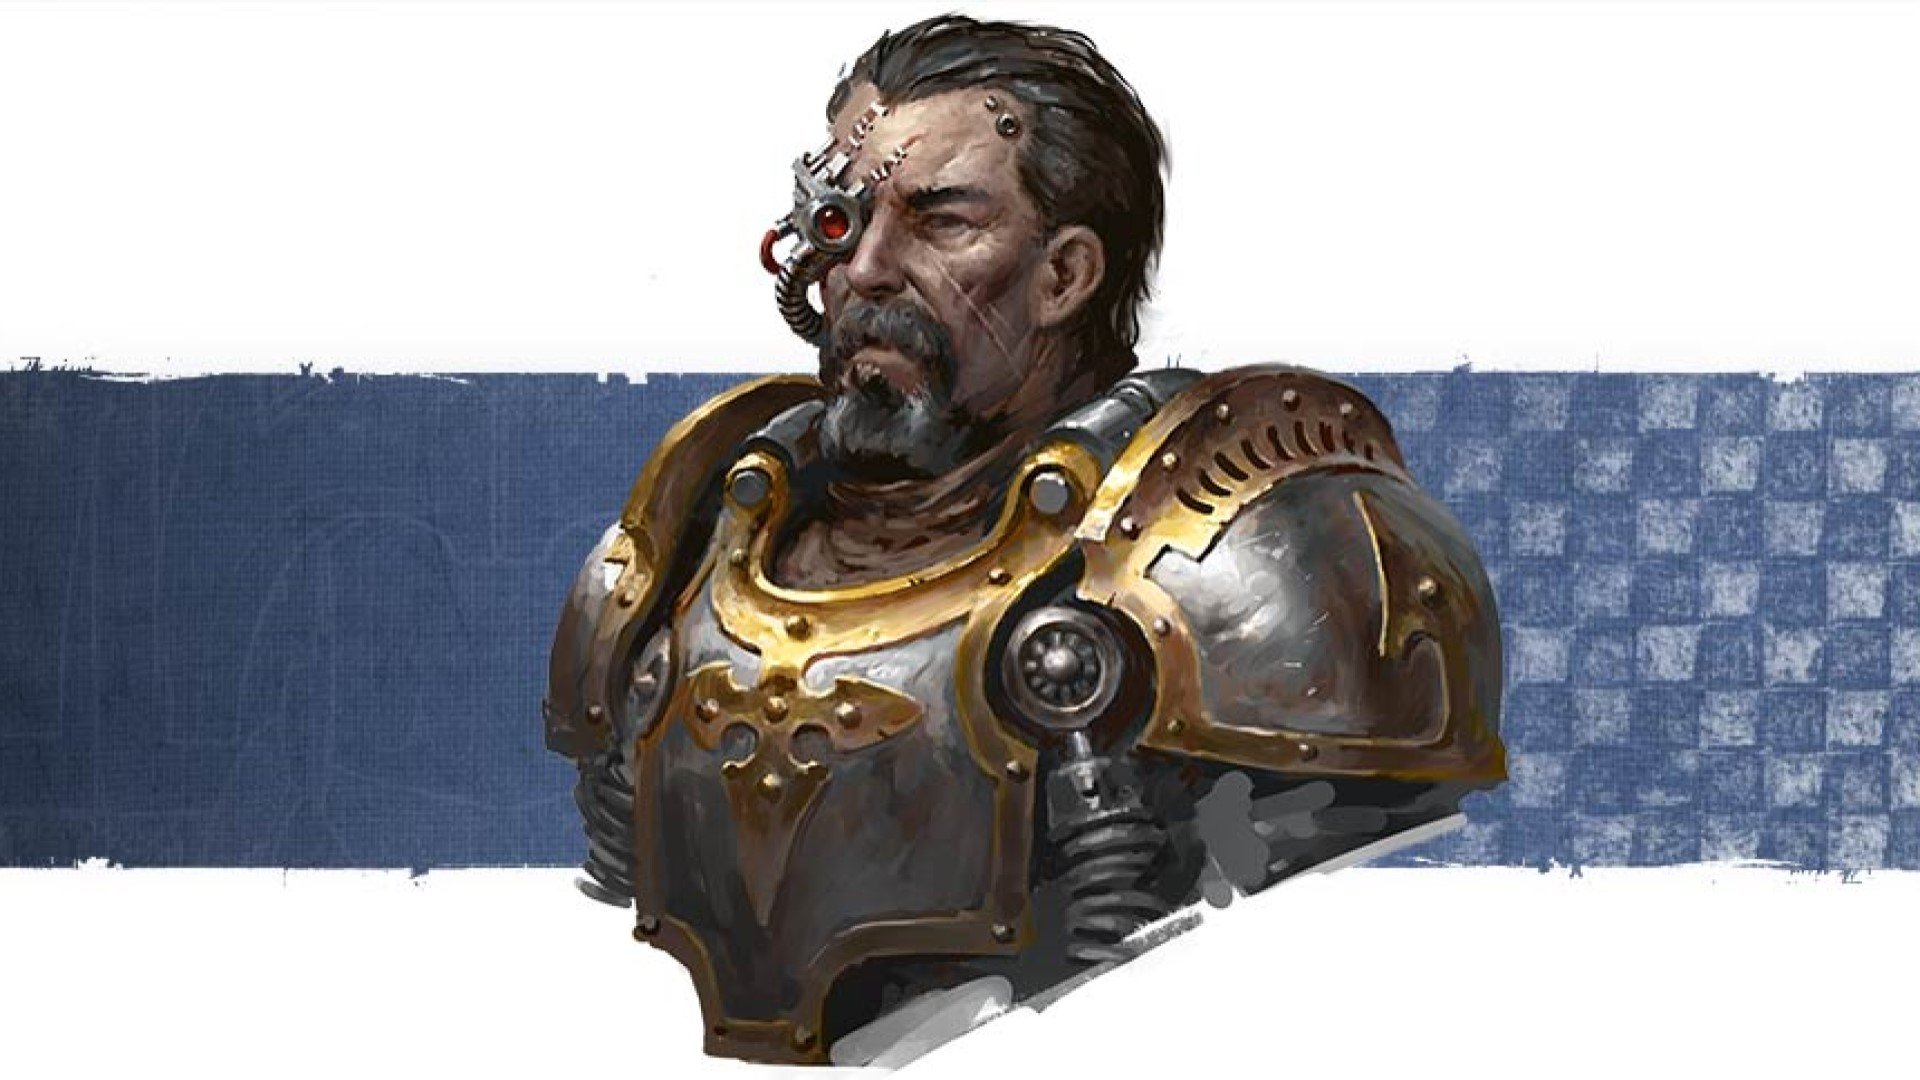 Warhammer 40k Imperial Knights army guide - Warhammer Community graphic showing the portrait of Hekhtur Cerberan, pilot of the famous Knight Canis Rex